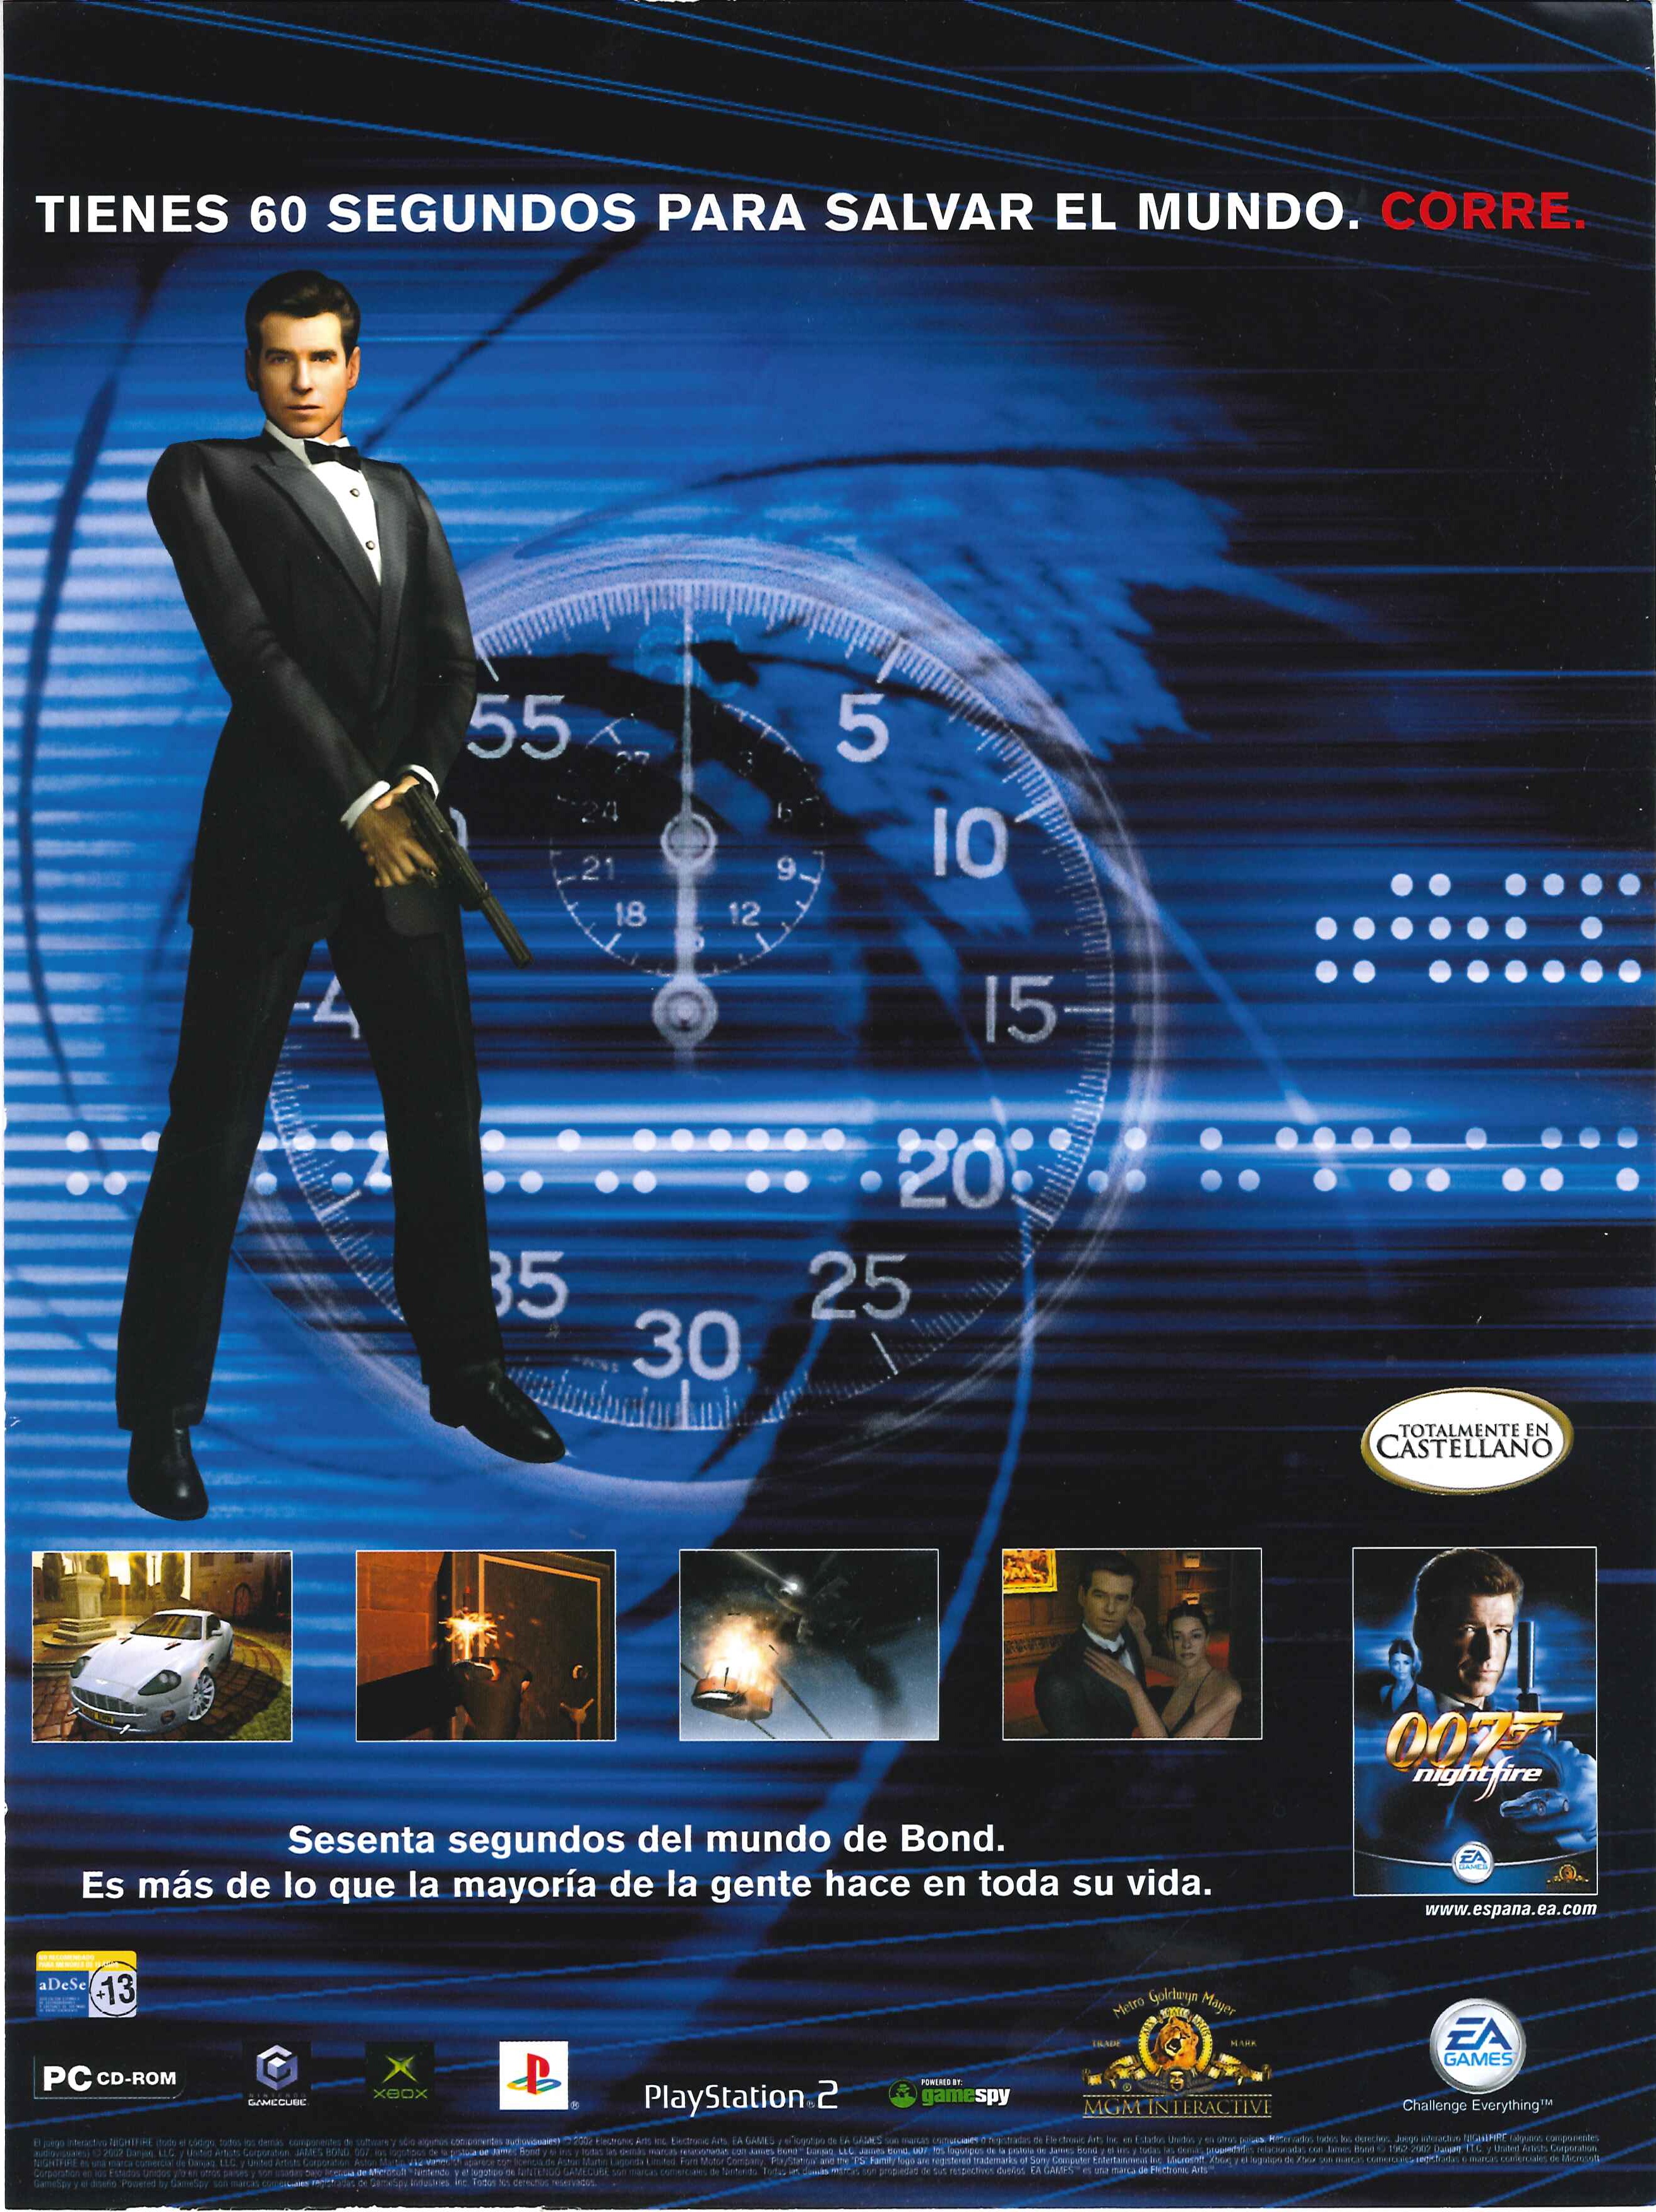 download 007 on ps5